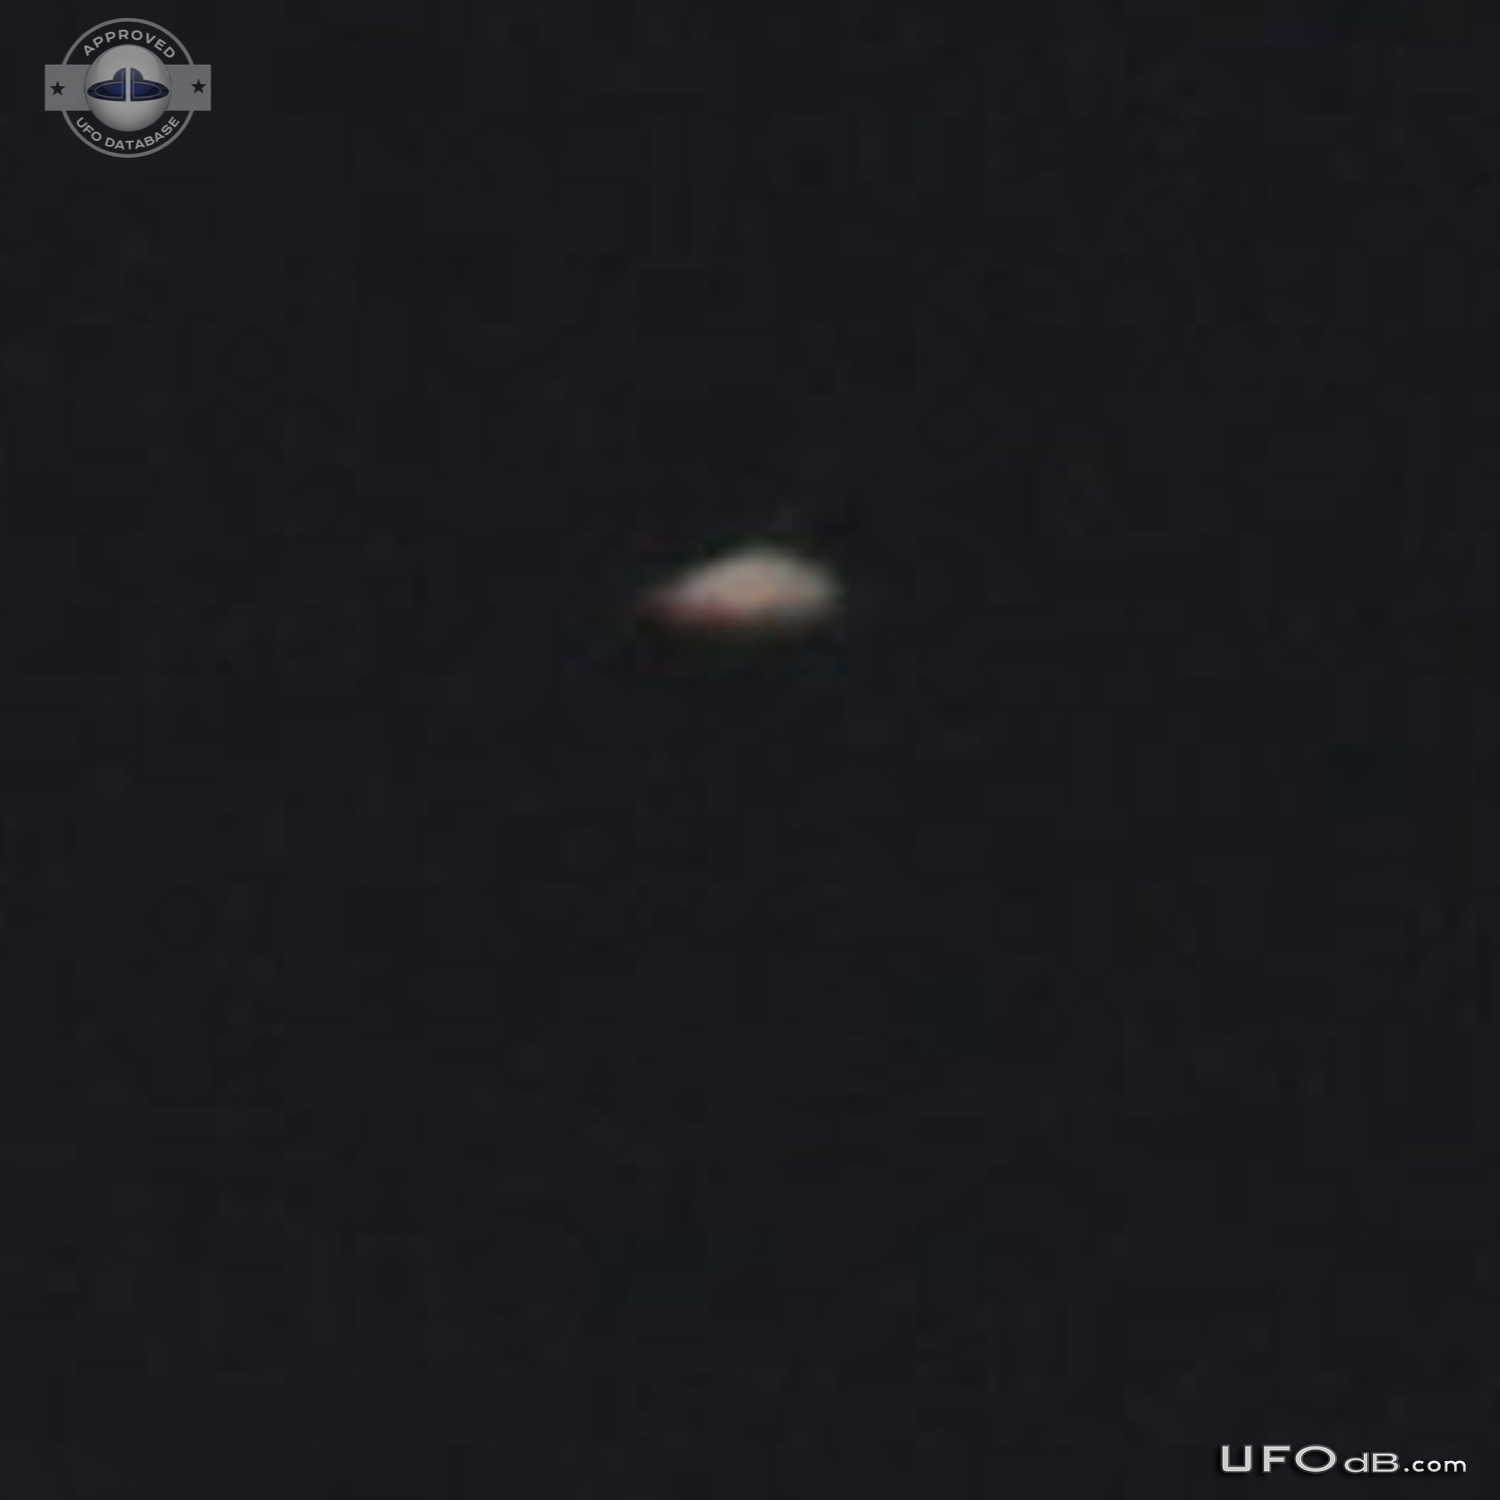 Saucer UFO appear on Soccer Game picture in Liverpool UK 2015 UFO Picture #626-5